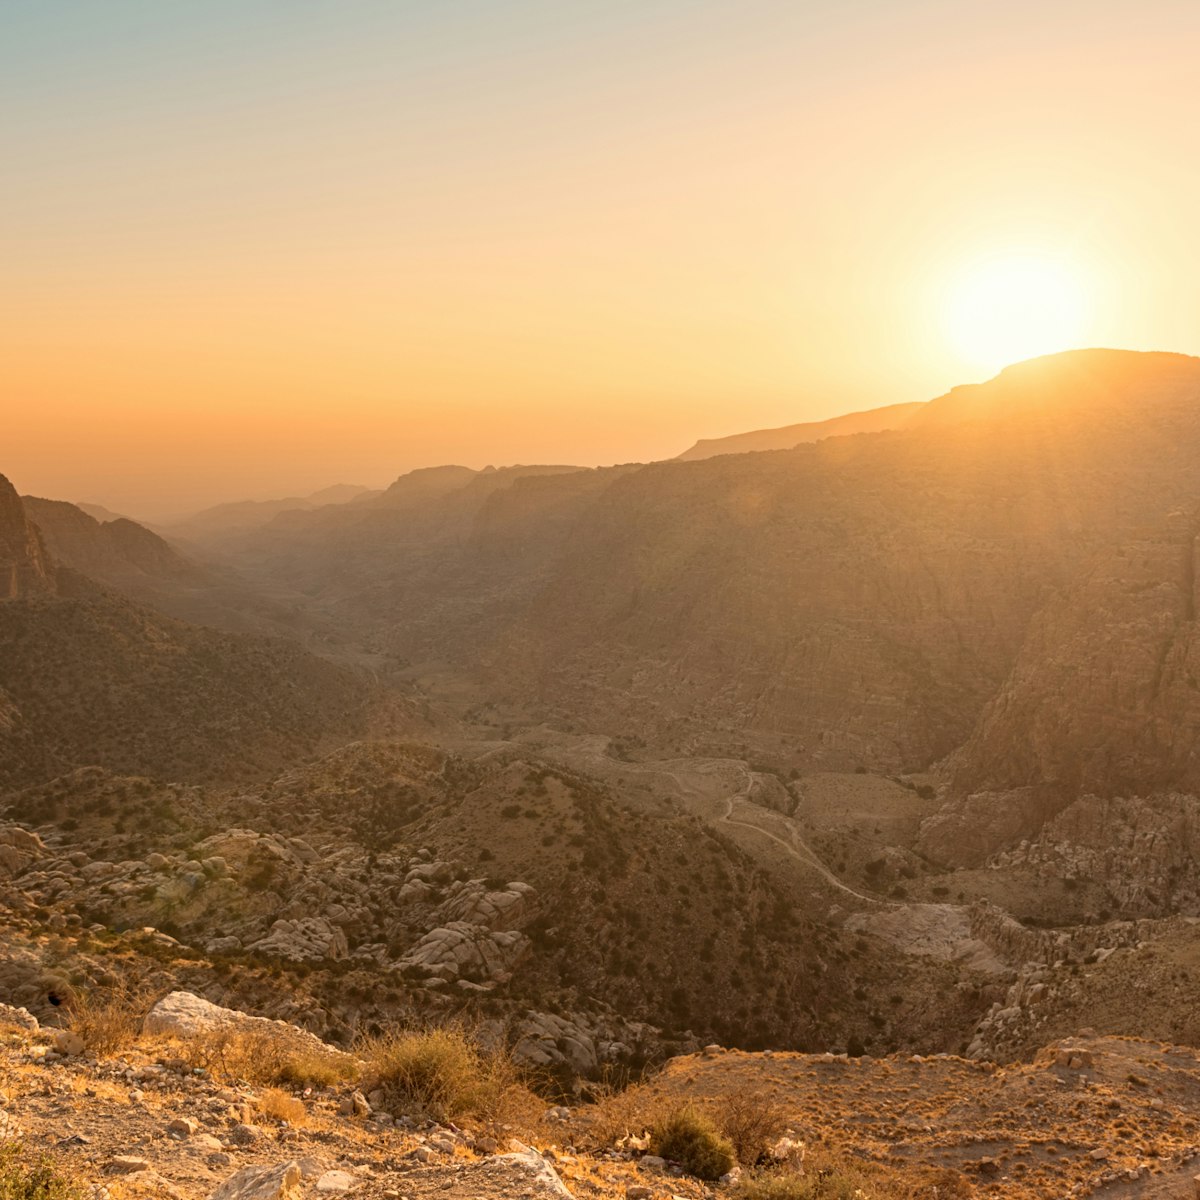 Dana Biosphere Reserve landscape at sunset from Dana historical village; Shutterstock ID 474783019; Your name (First / Last): Lauren Keith; GL account no.: 65050; Netsuite department name: Content Asset; Full Product or Project name including edition: Jordan 2017
adventure, arabic, arid, asia, biosphere, colored, dana, dry, east, explore, islamic, jordan, middle, mountain, natural, park, path, reserve, rock, sunset, travel, trekking, wild